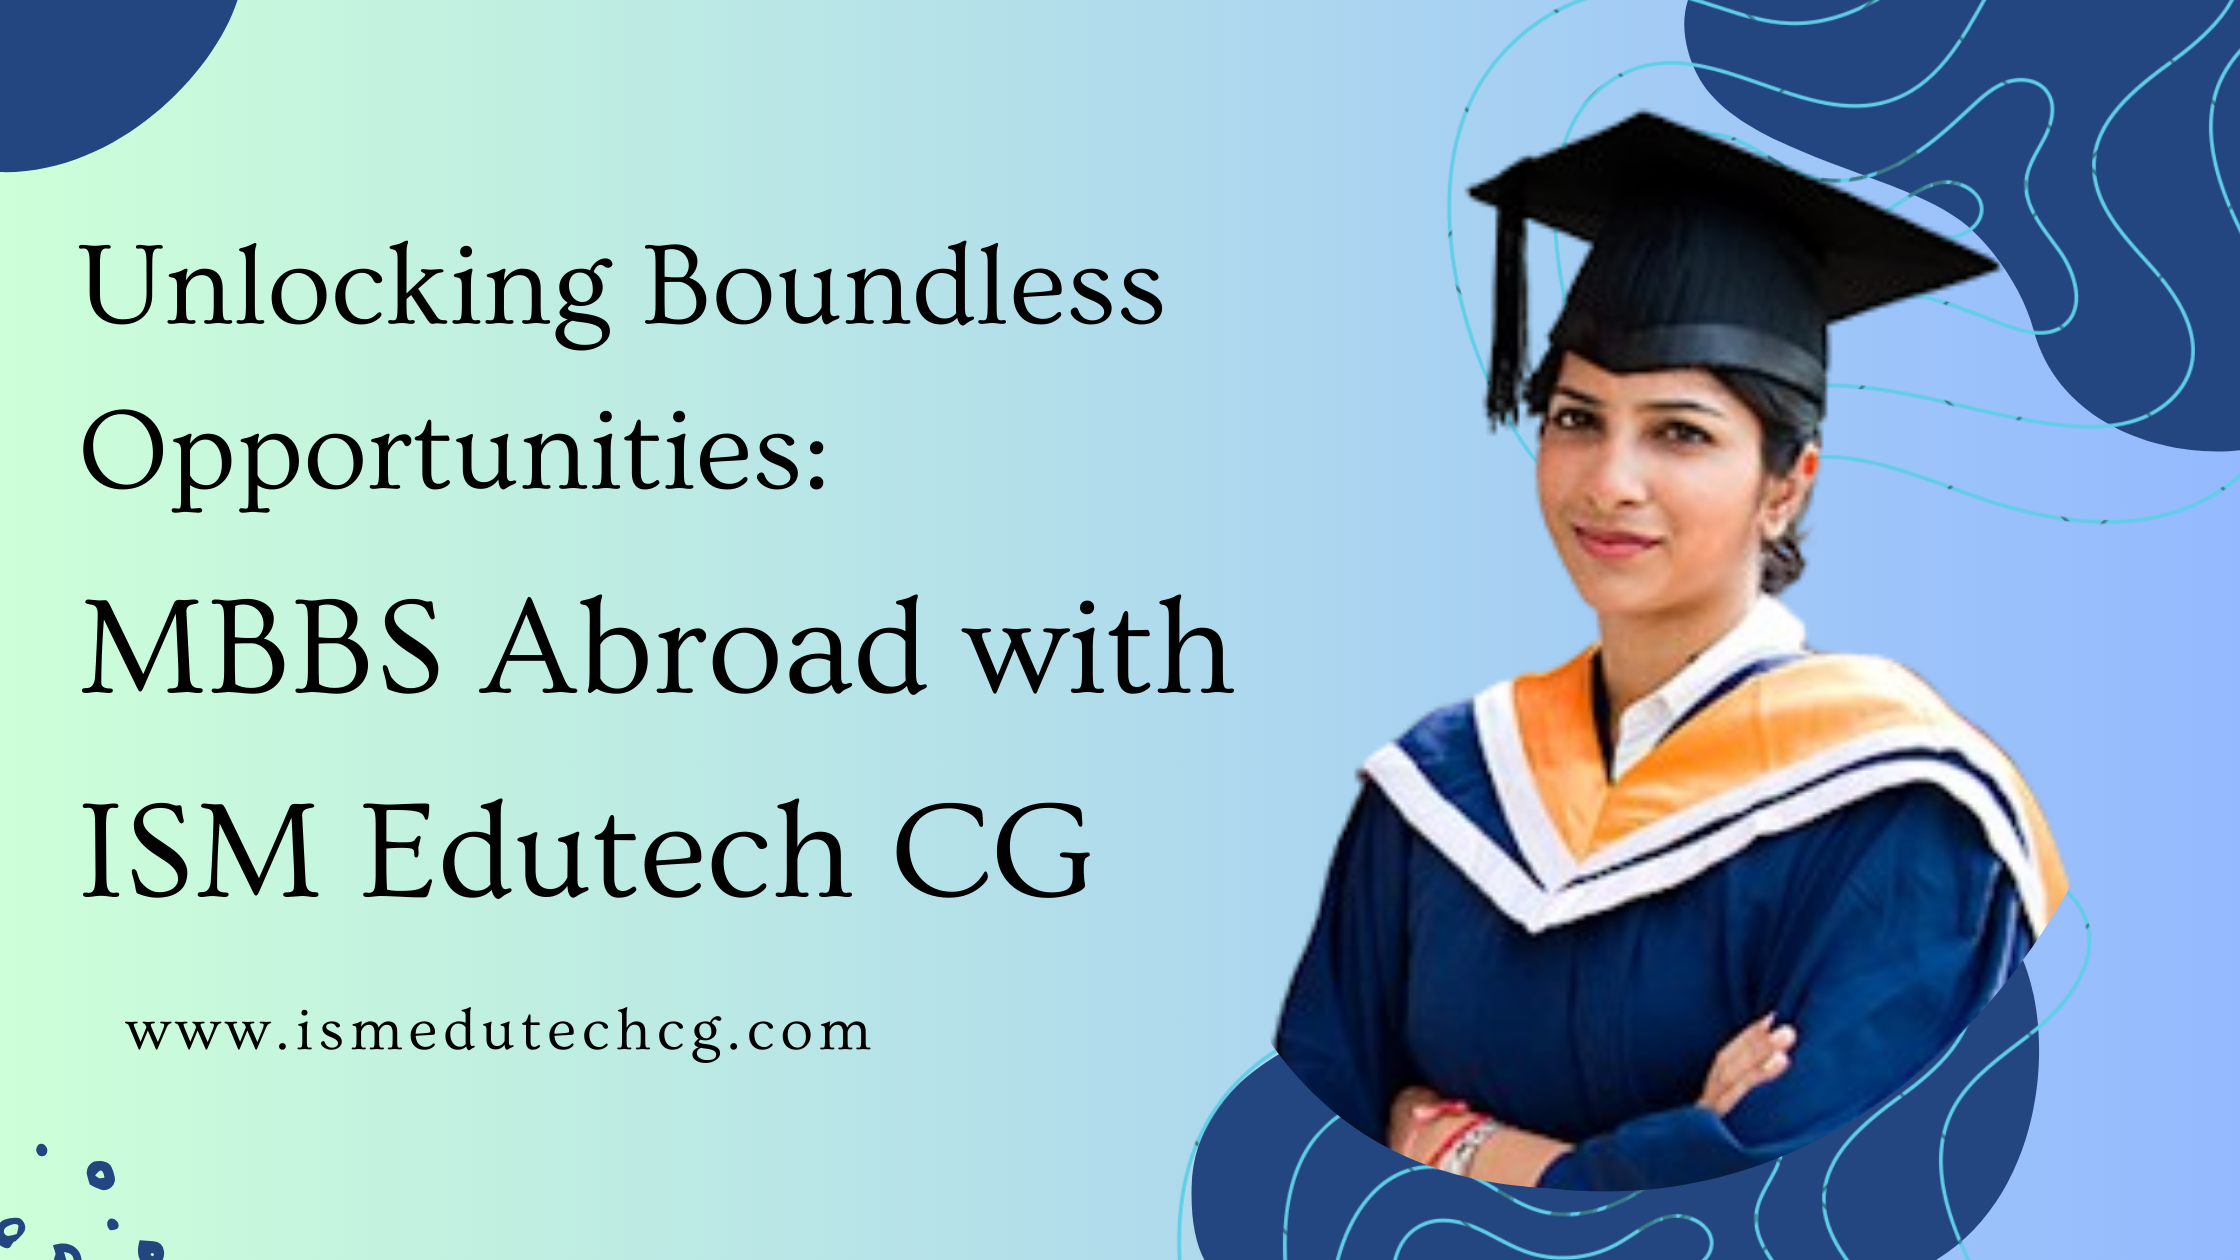 Unlocking Boundless Opportunities: MBBS Abroad with ISM Edutech CG